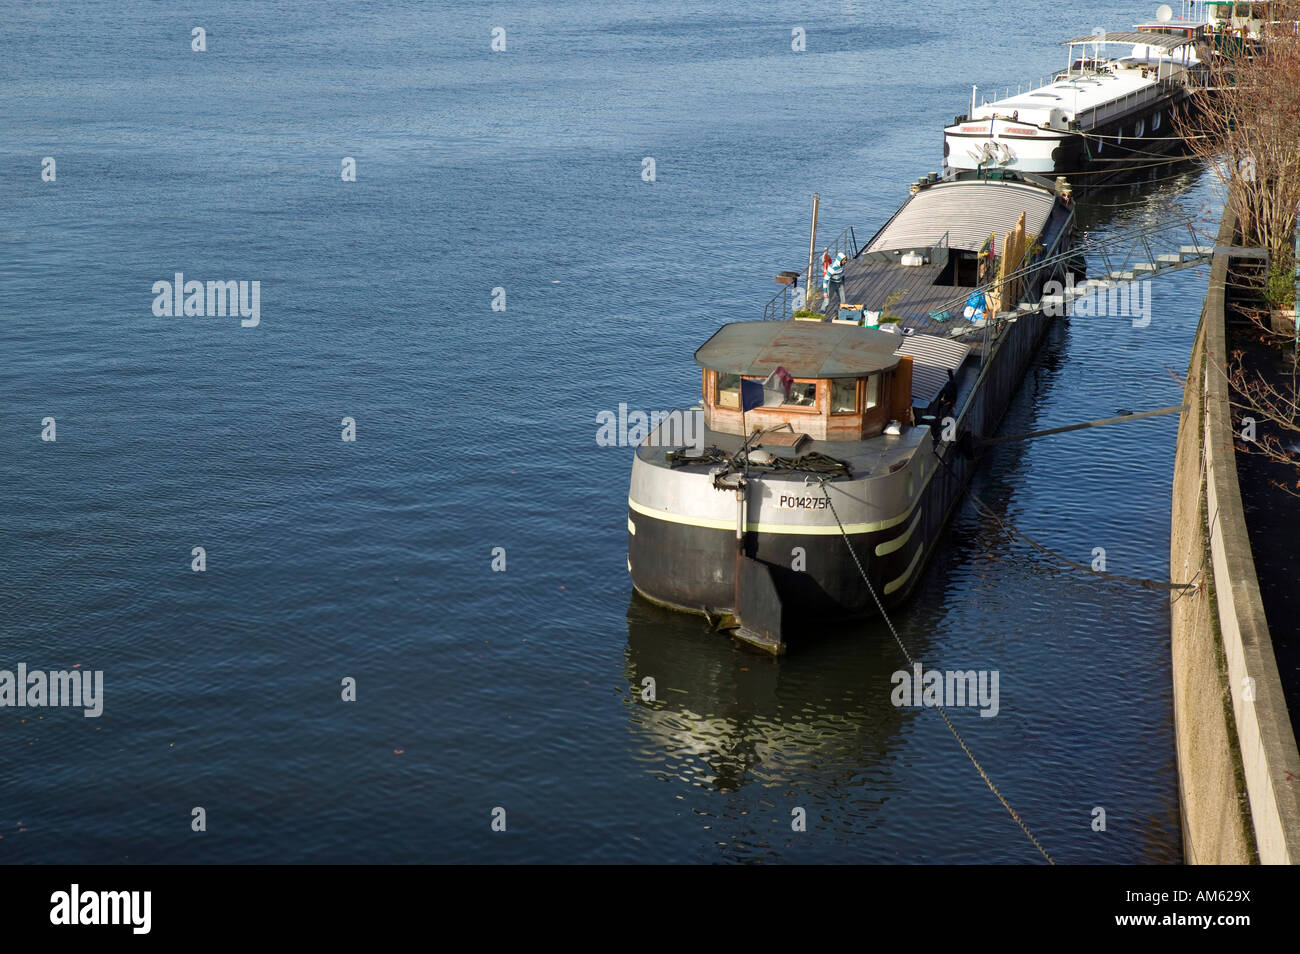 Barges used as homes moored on the Seine river near Paris France 1 December 2007 Stock Photo